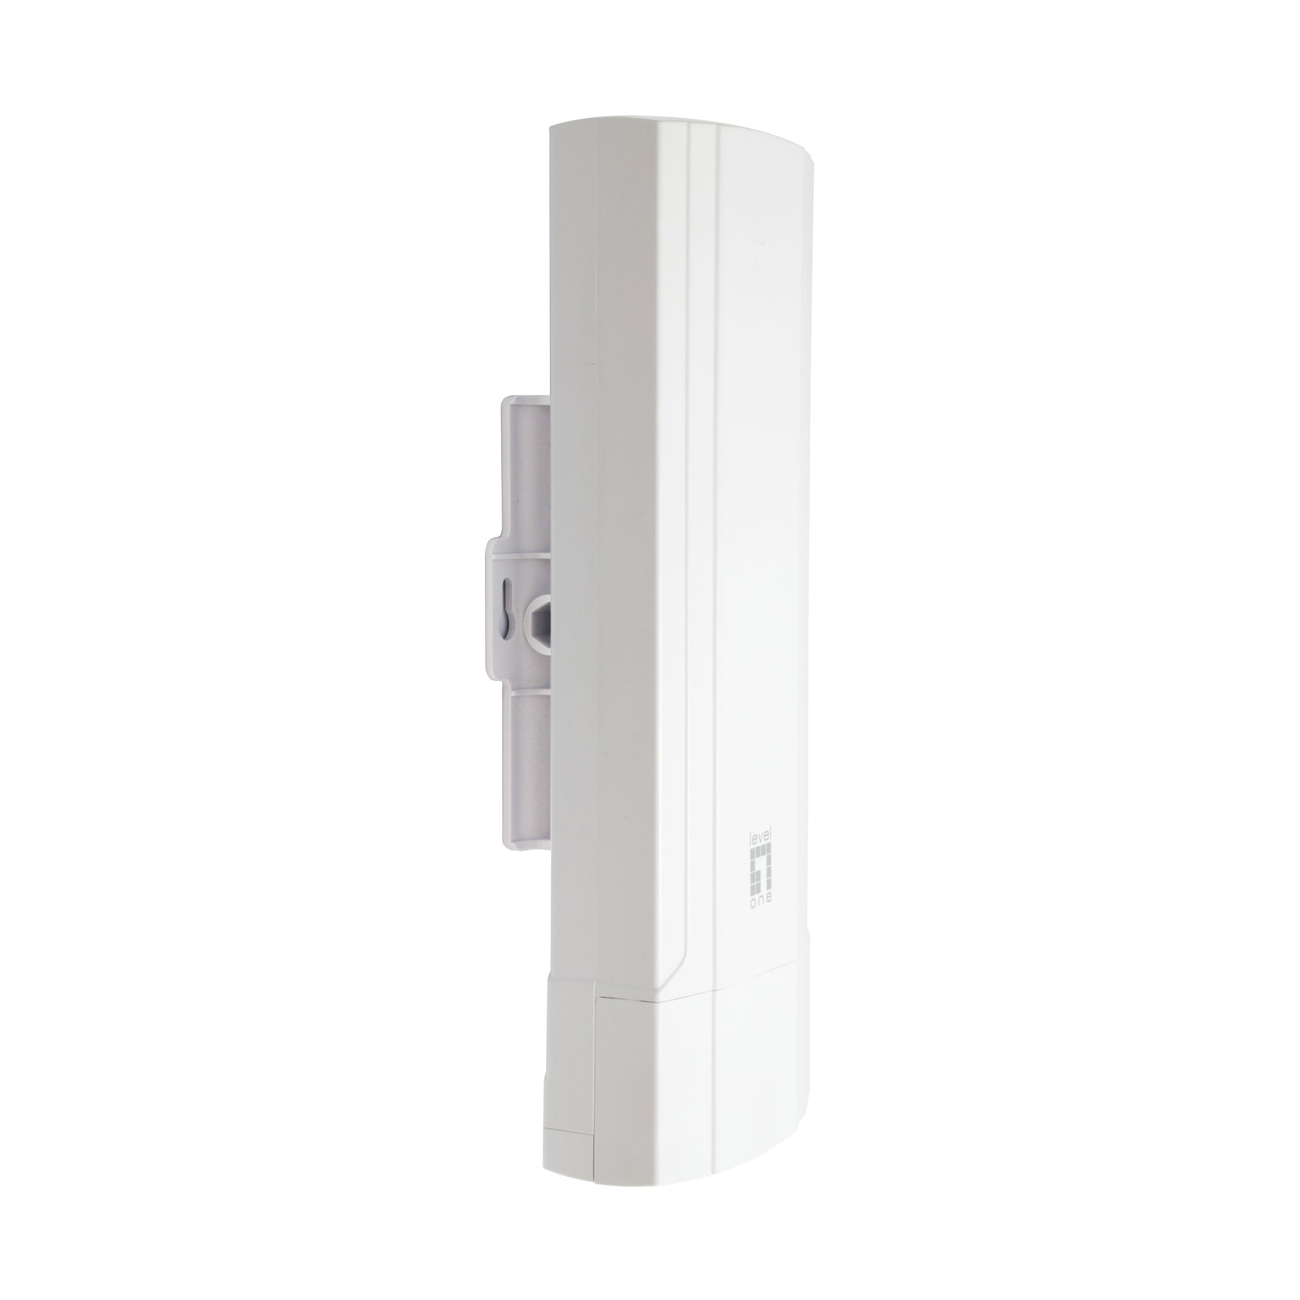 LevelOne WLAN Access Point & Extender outdoor 5GHz PoE